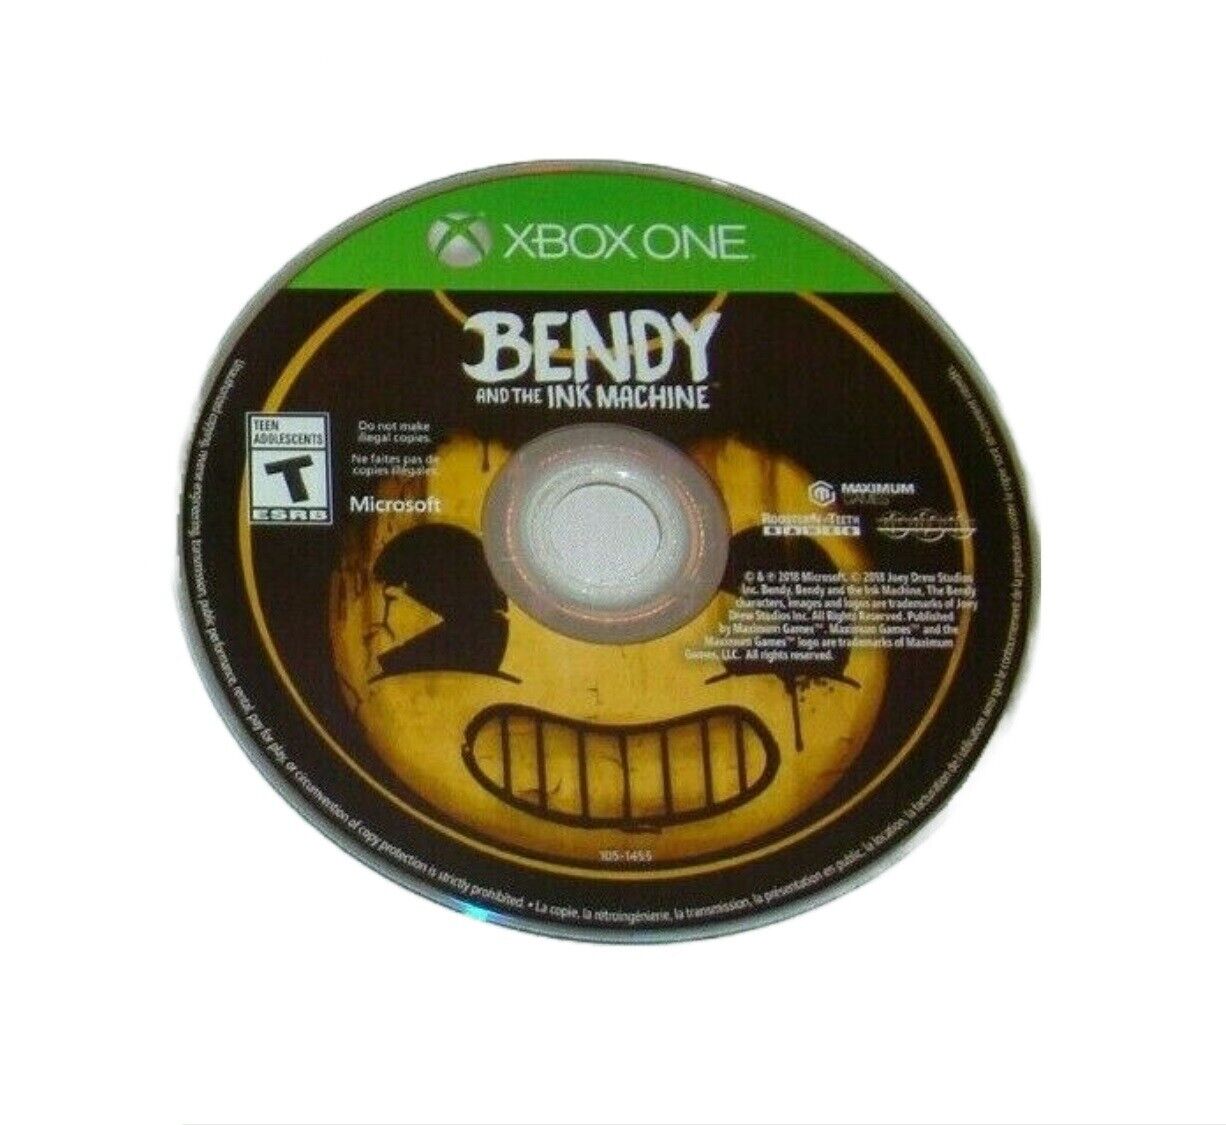 Bendy and the Ink Machine for Microsoft Xbox One (Disc Only)